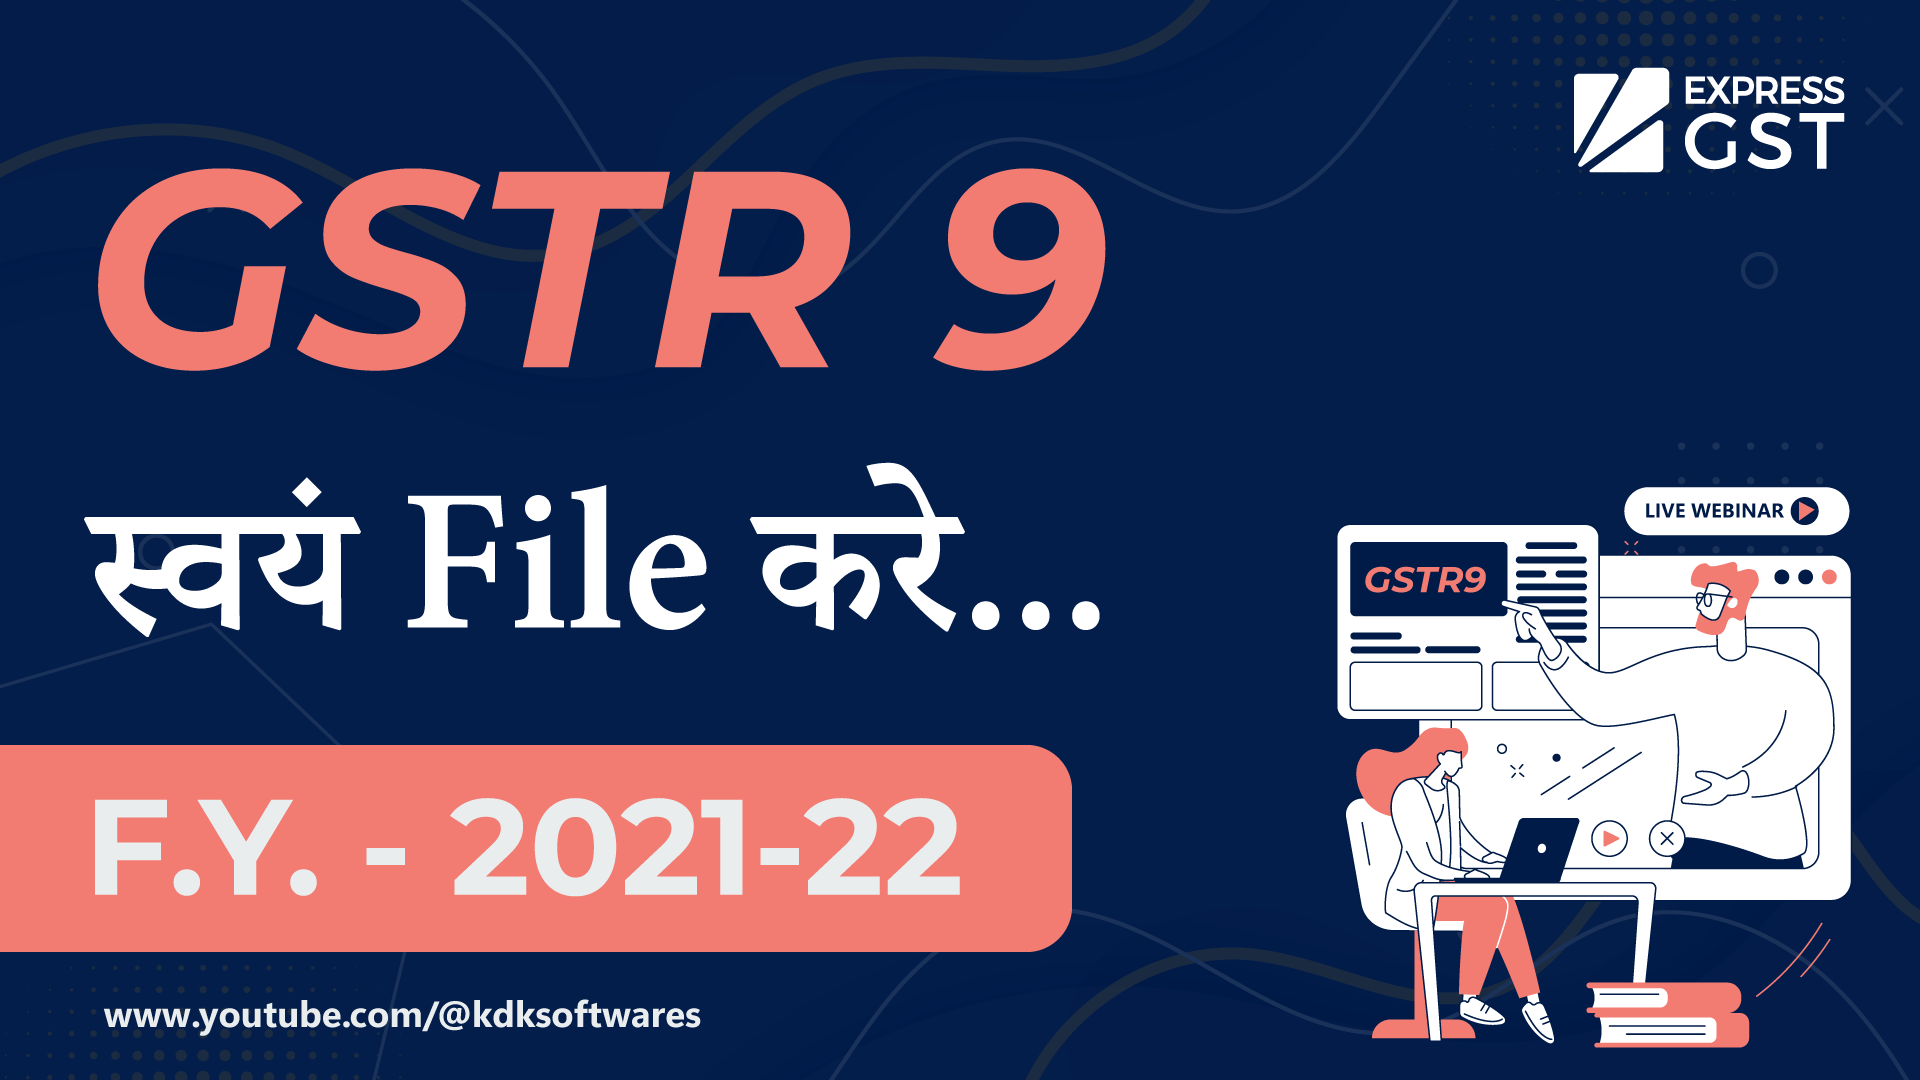 Learn How to File GSTR 9 (GST Annual Returns) for FY 2021-22